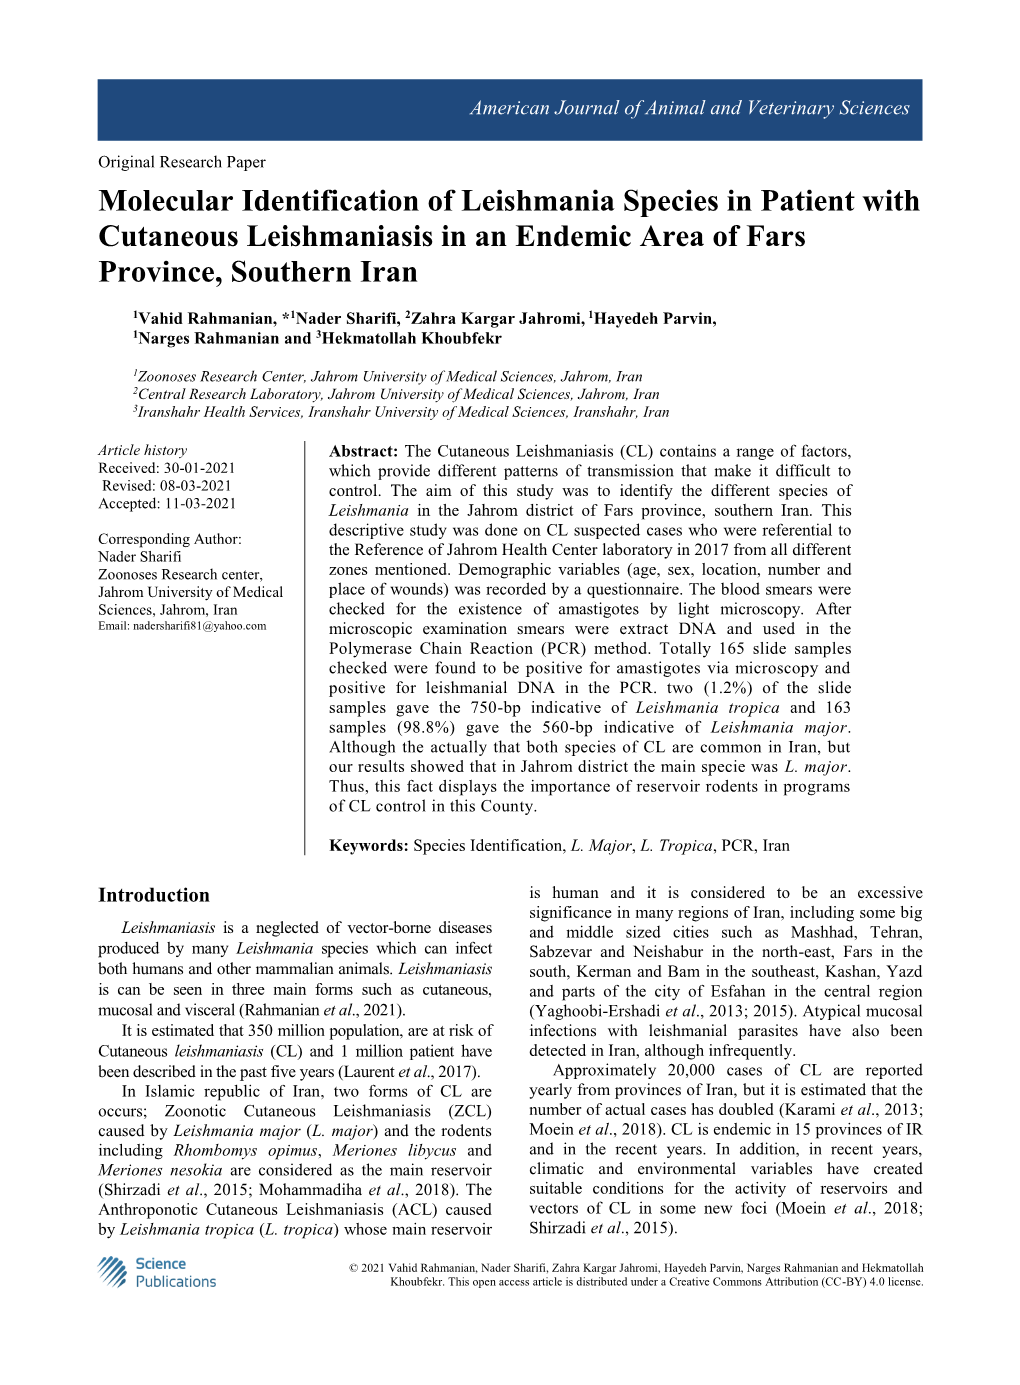 Molecular Identification of Leishmania Species in Patient with Cutaneous Leishmaniasis in an Endemic Area of Fars Province, Southern Iran